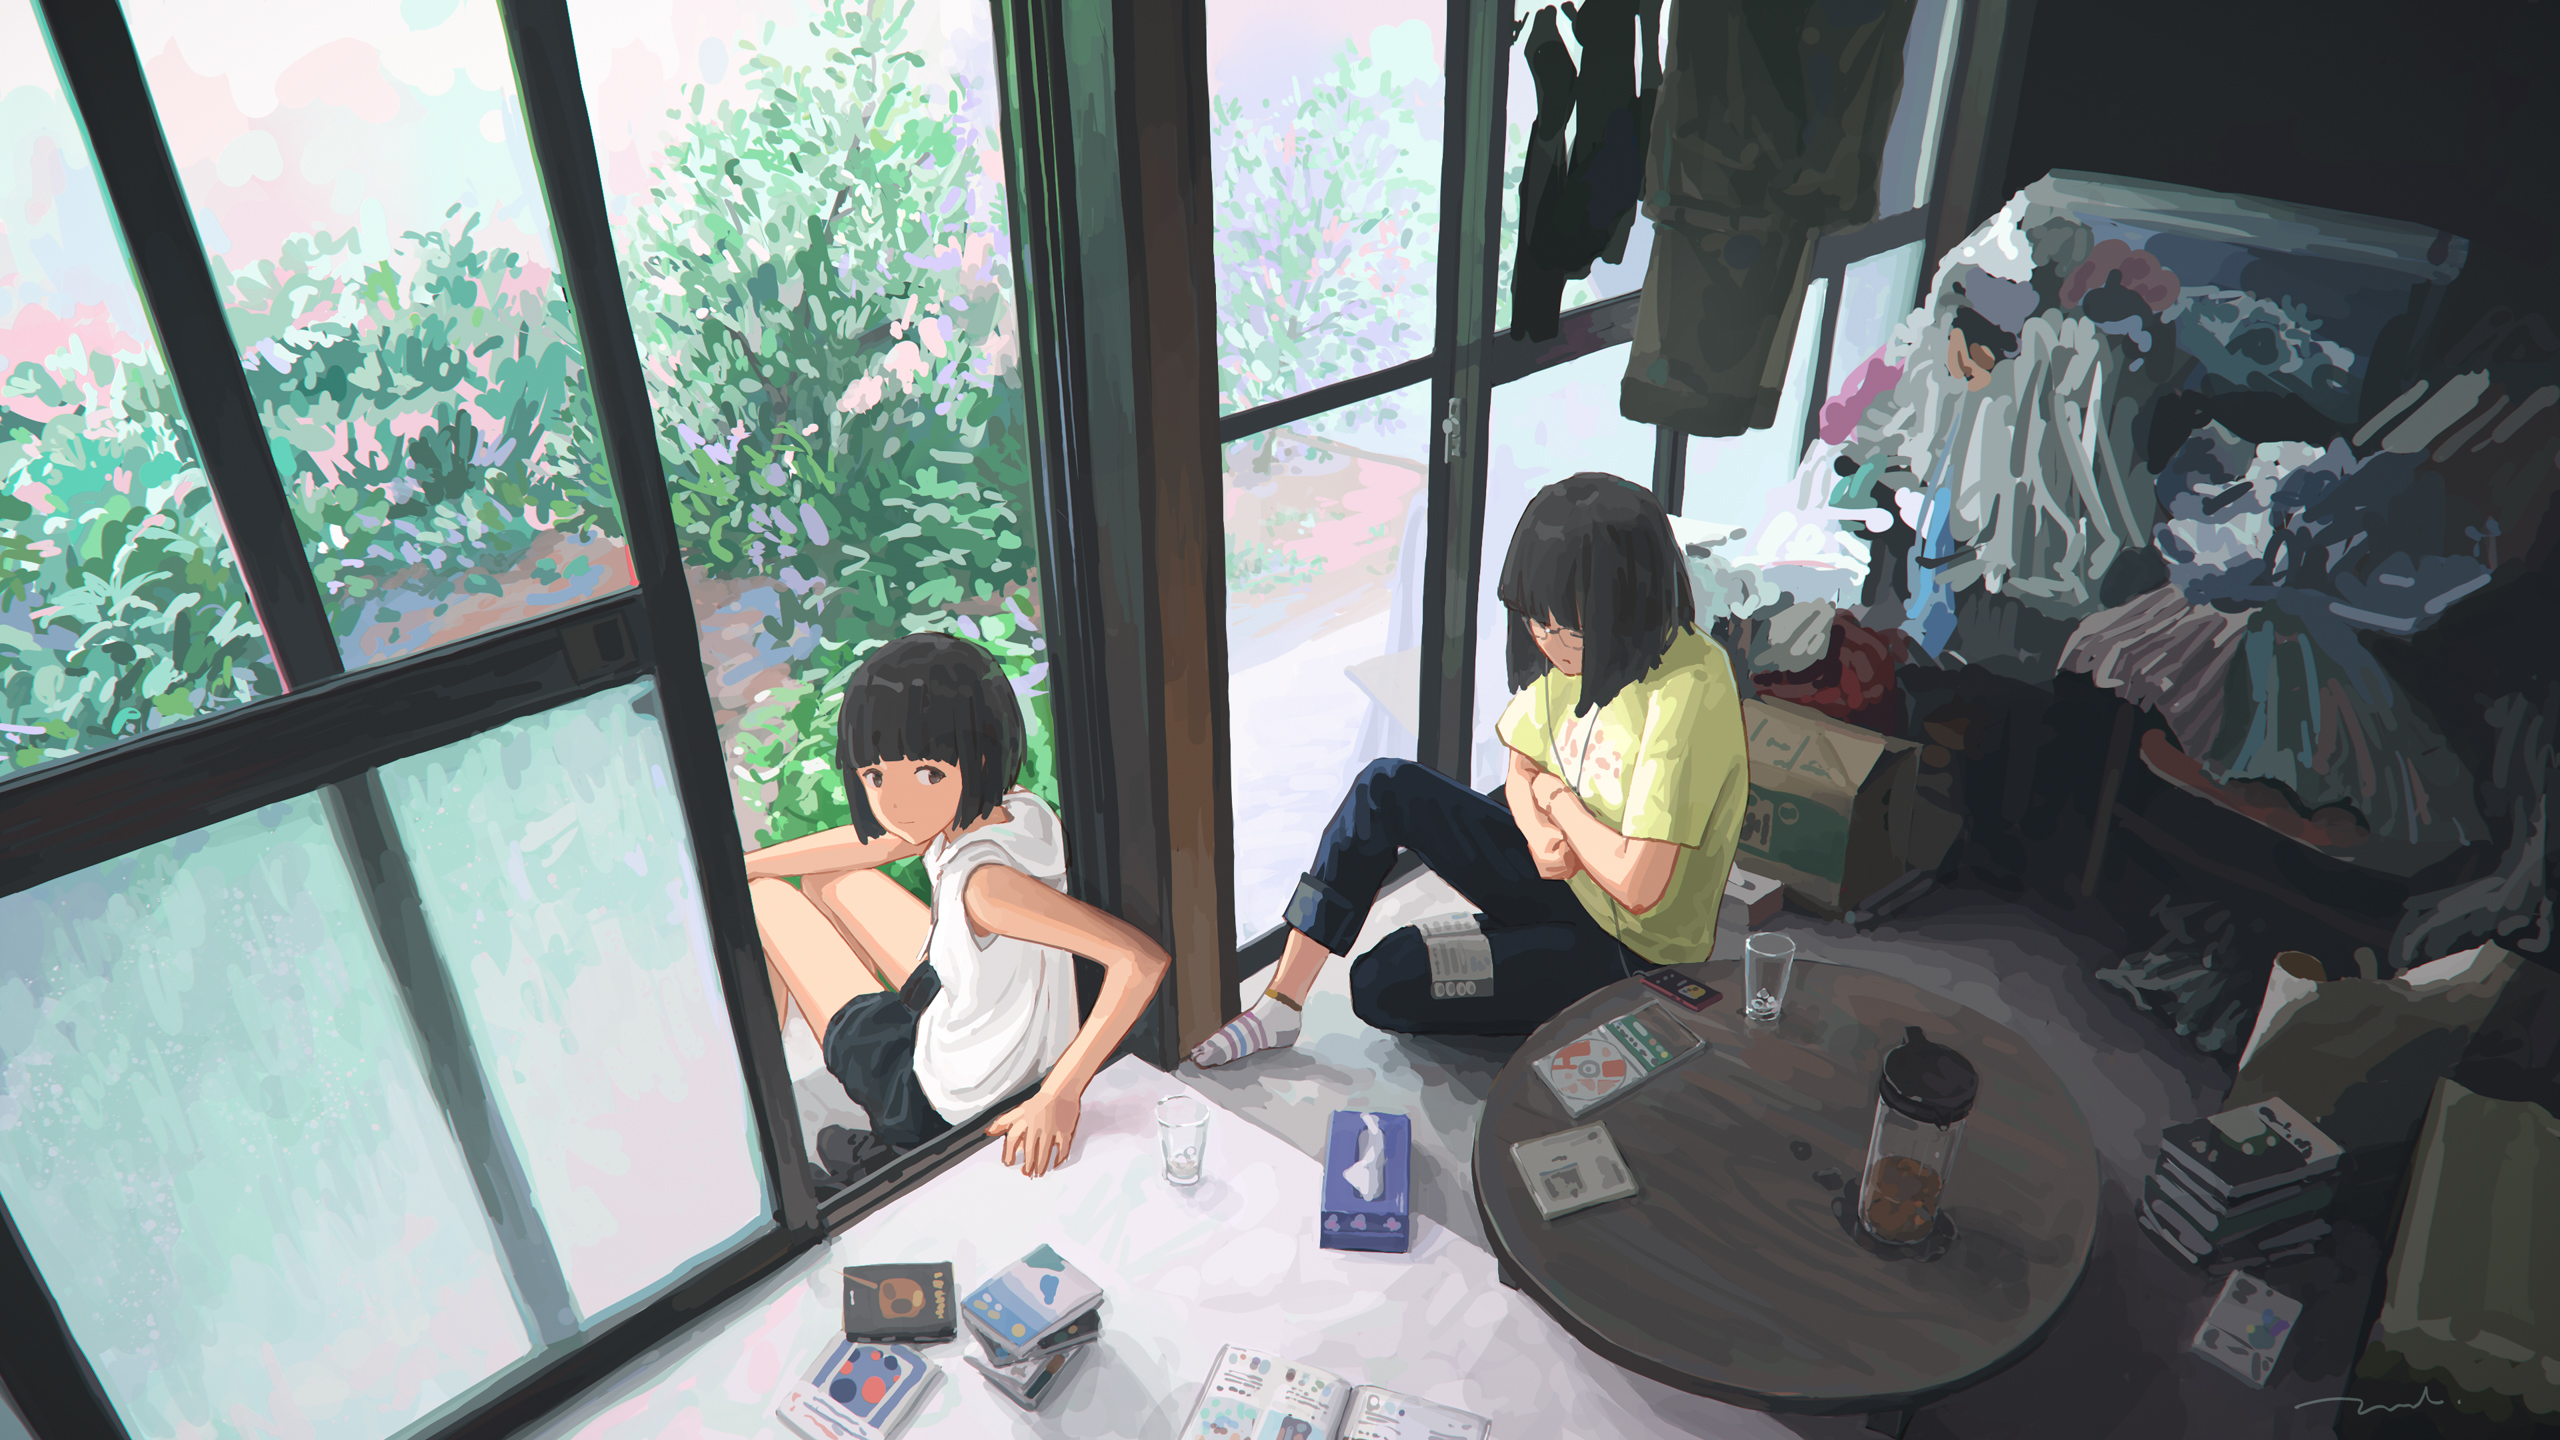 Two girls in a messy room by たねんぼ